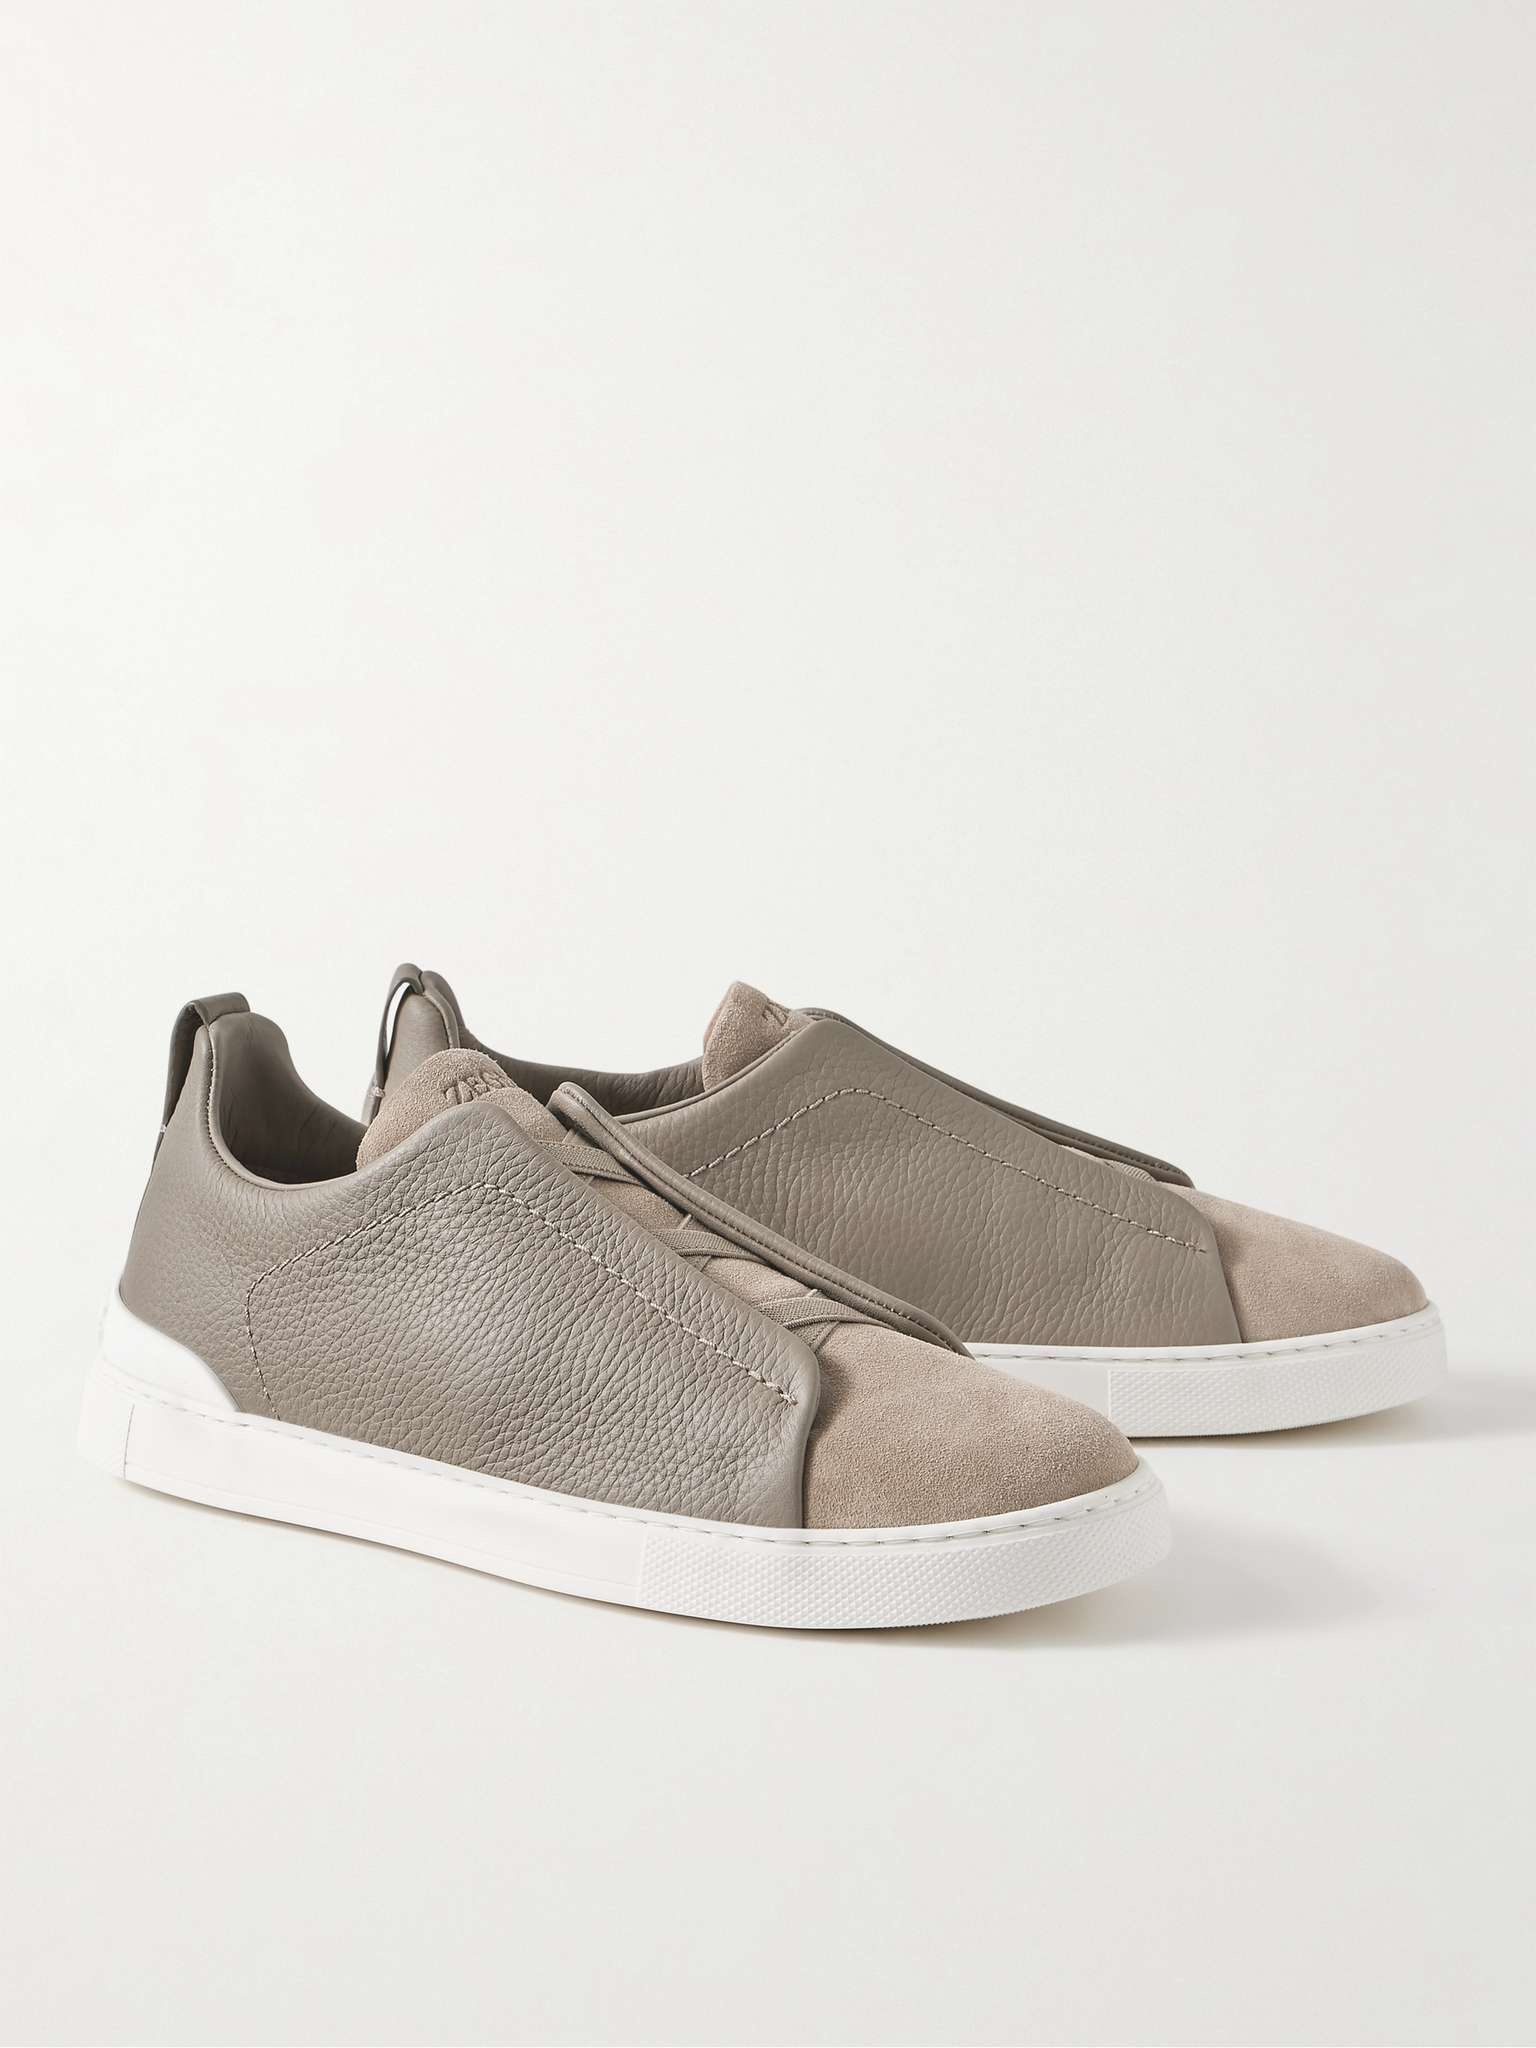 Triple Stitch Full-Grain Leather and Suede Sneakers - 4